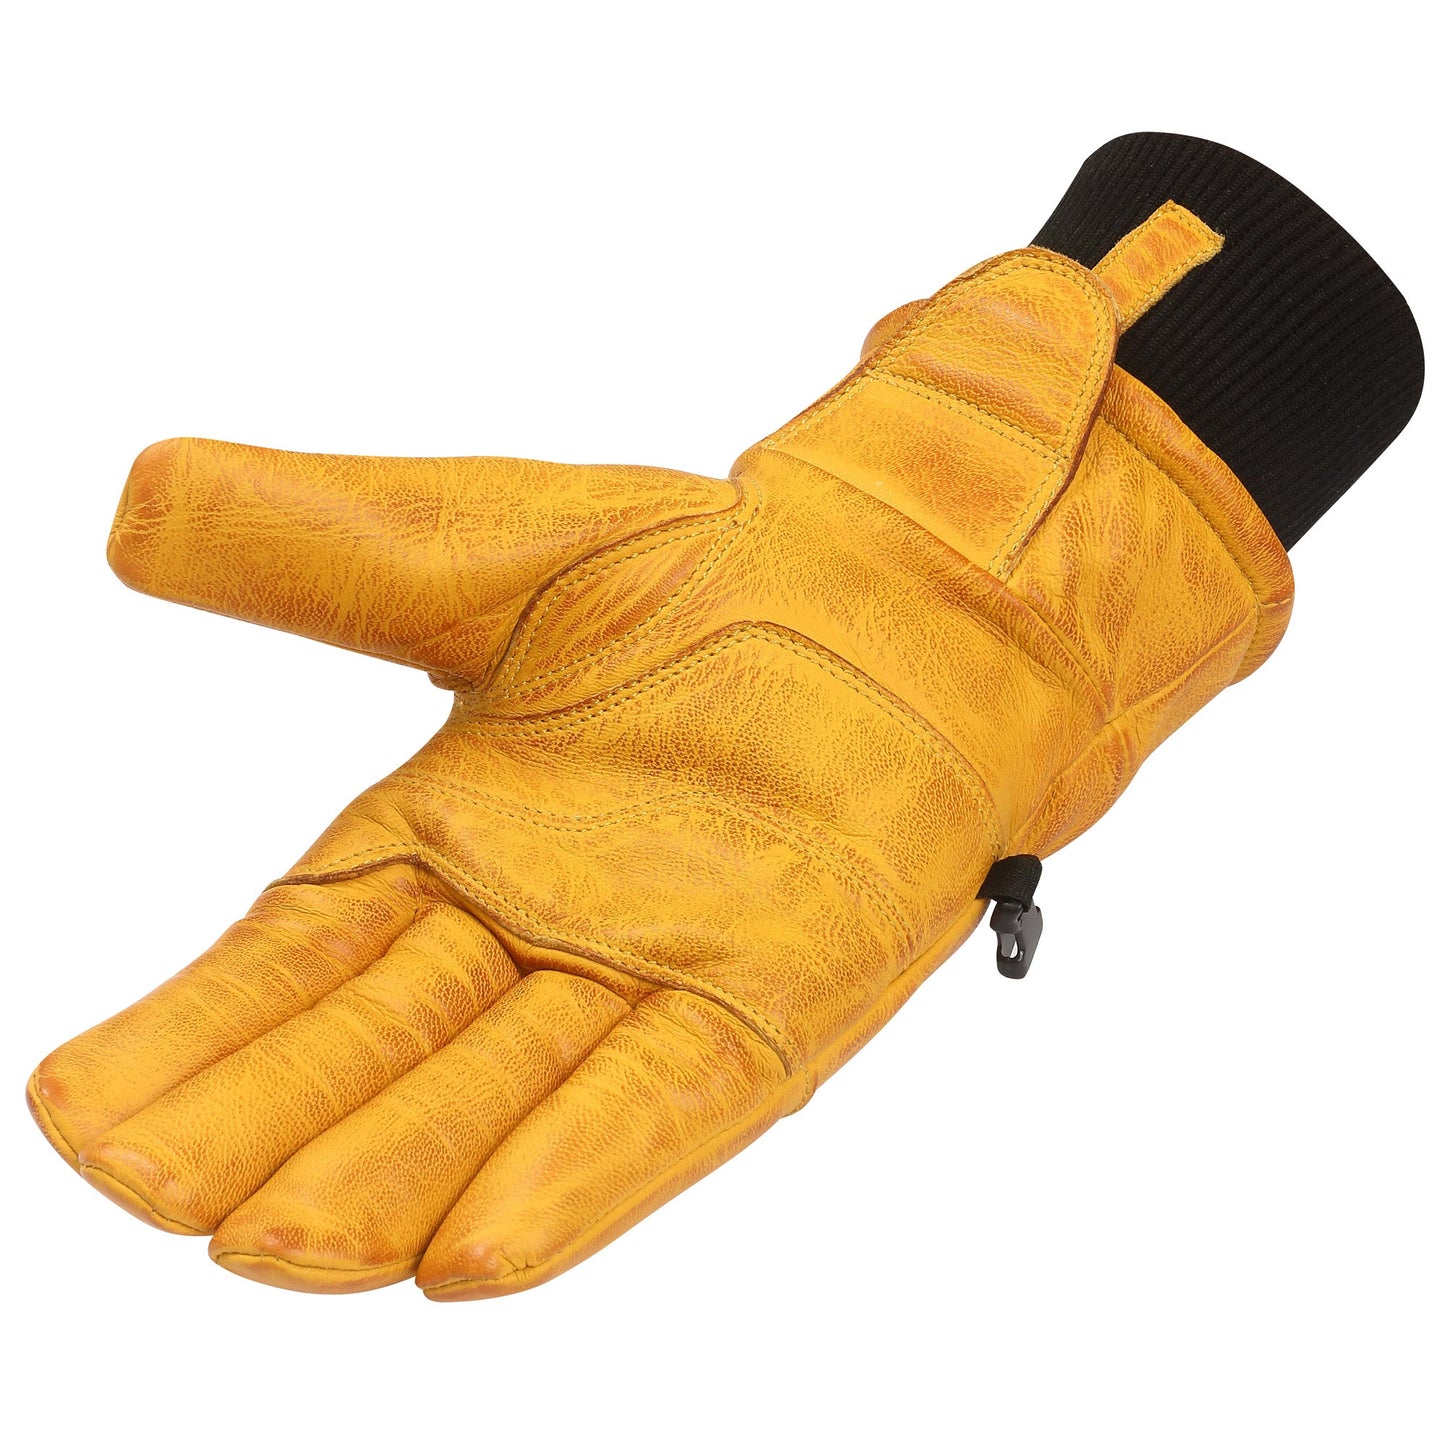 Vance Snow Mens Womens Unisex Goatskin Leather Insulated Winter Ski and Snowboard Gloves Tan Yellow Palm Pinky Side